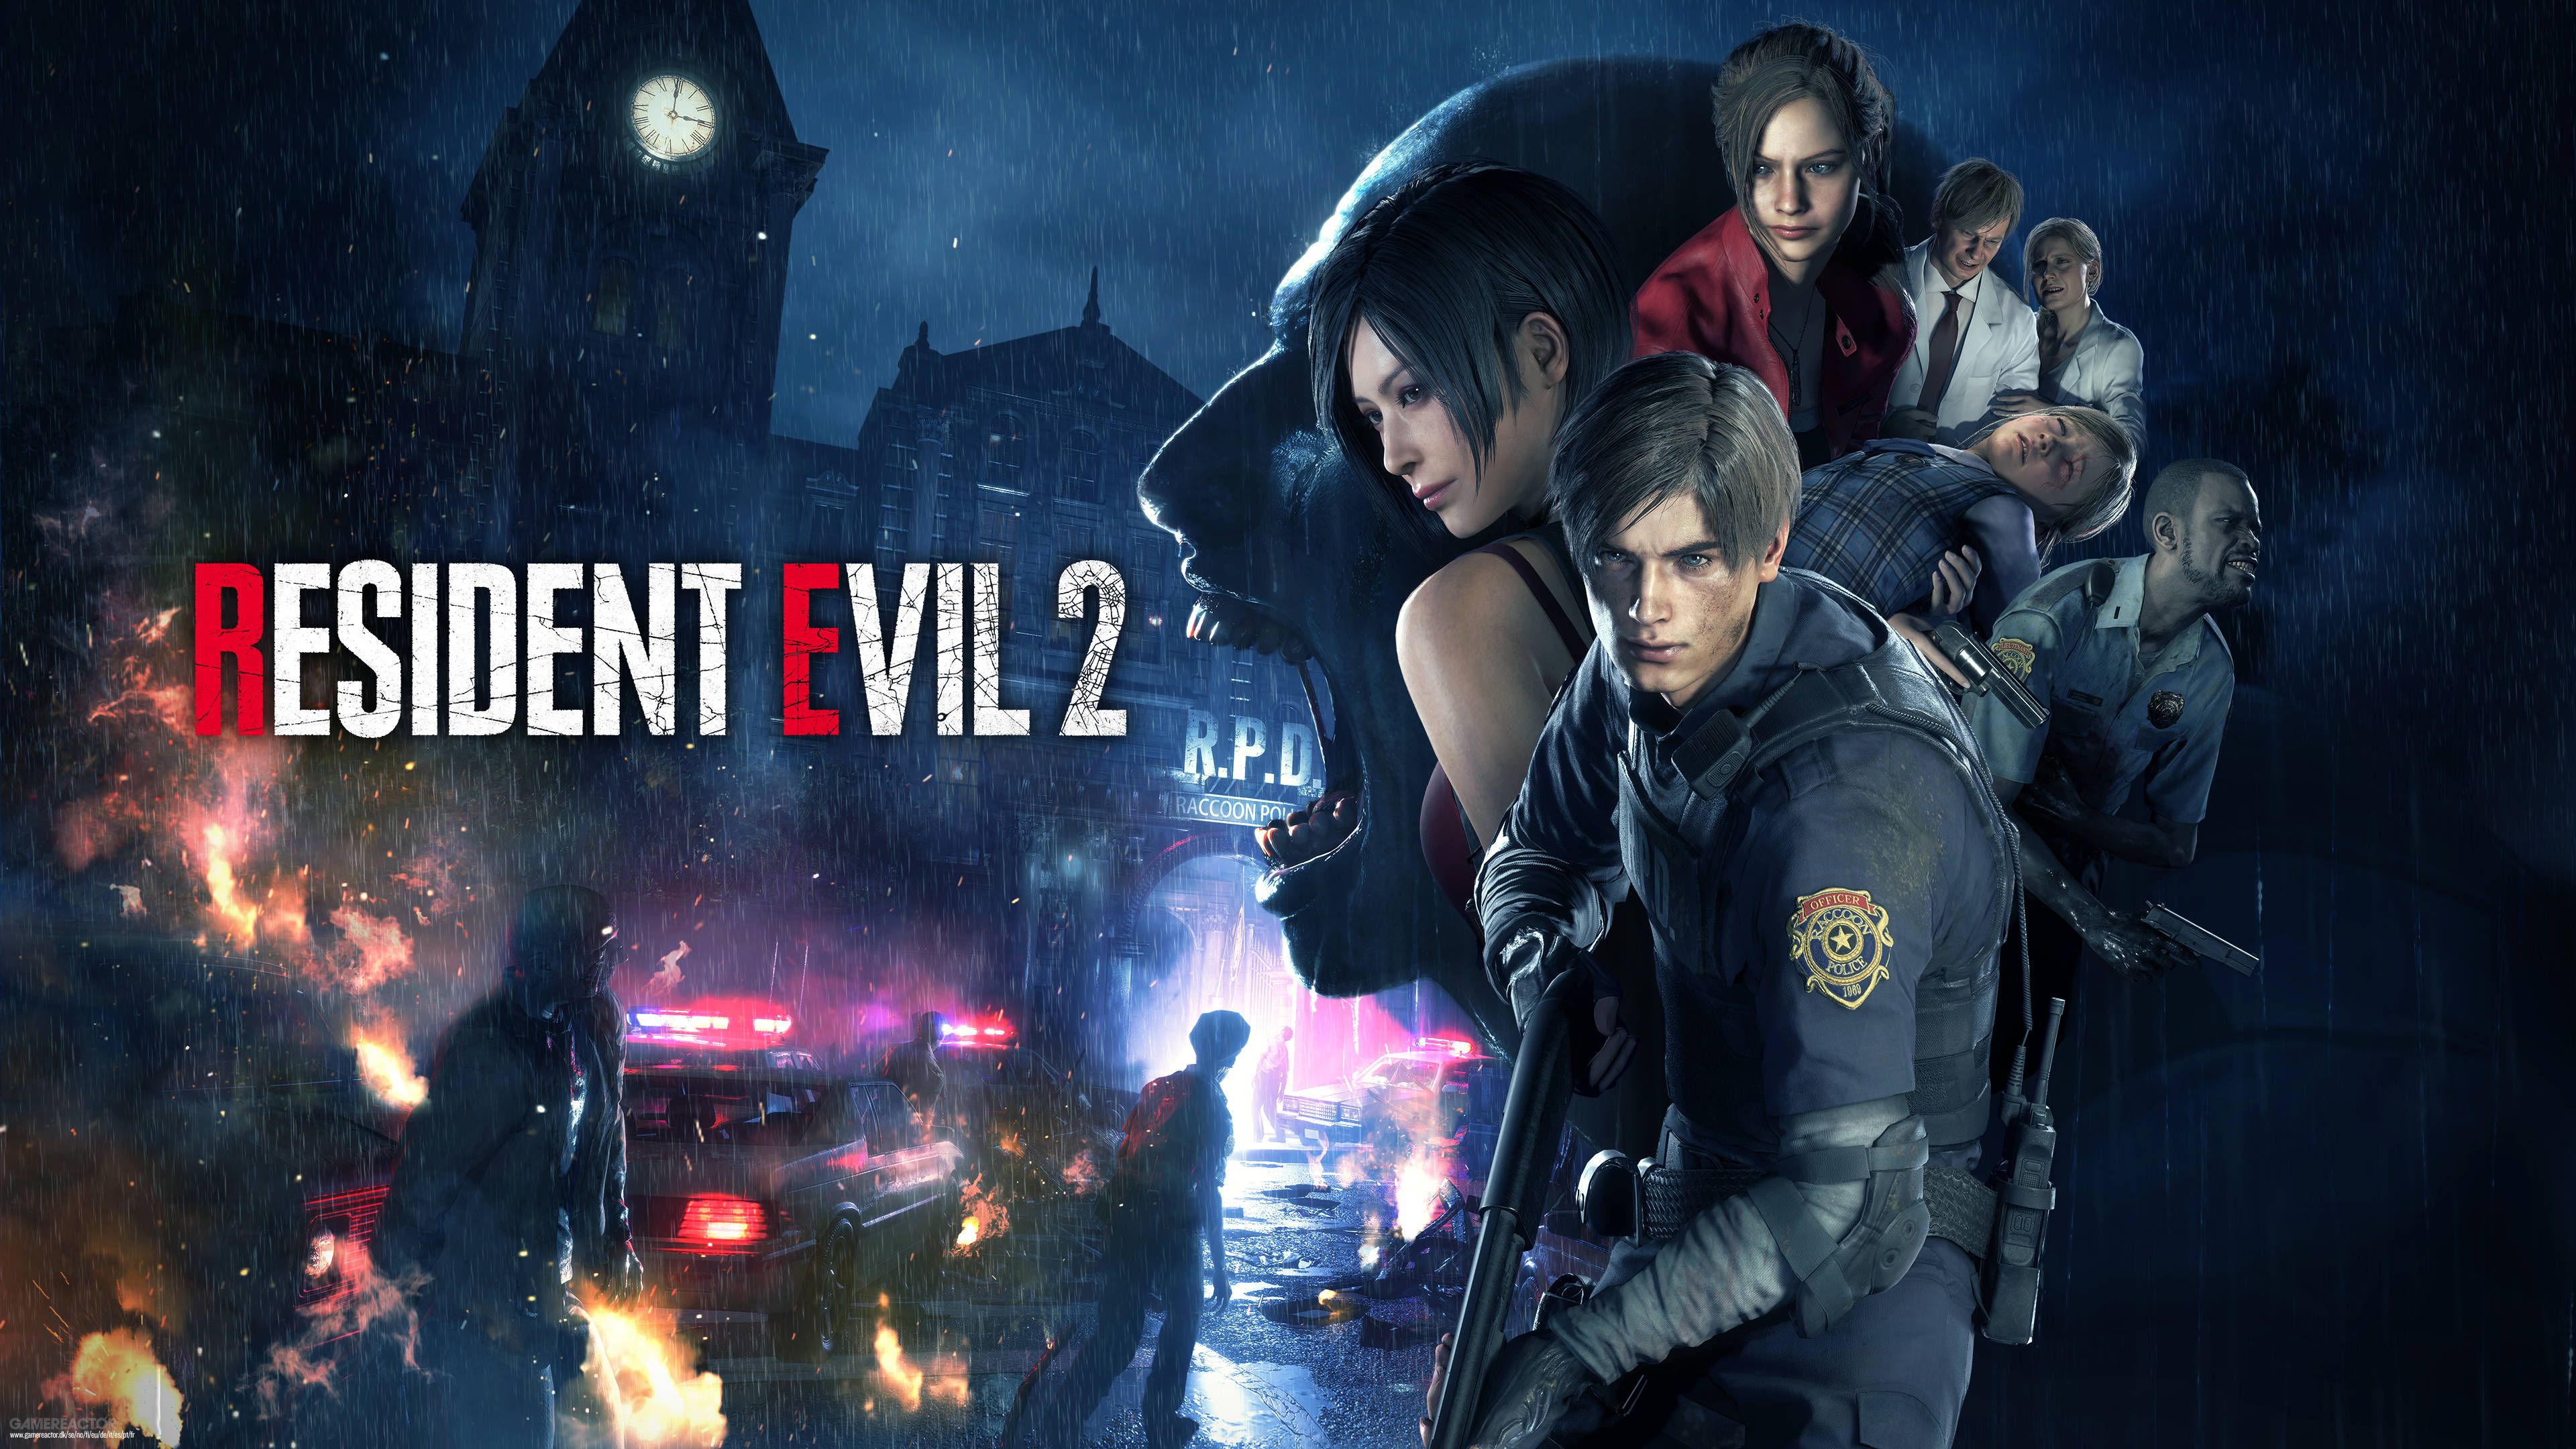 Capcom removes ray tracing from Resident Evil 2 and Resident Evil 3 on PC